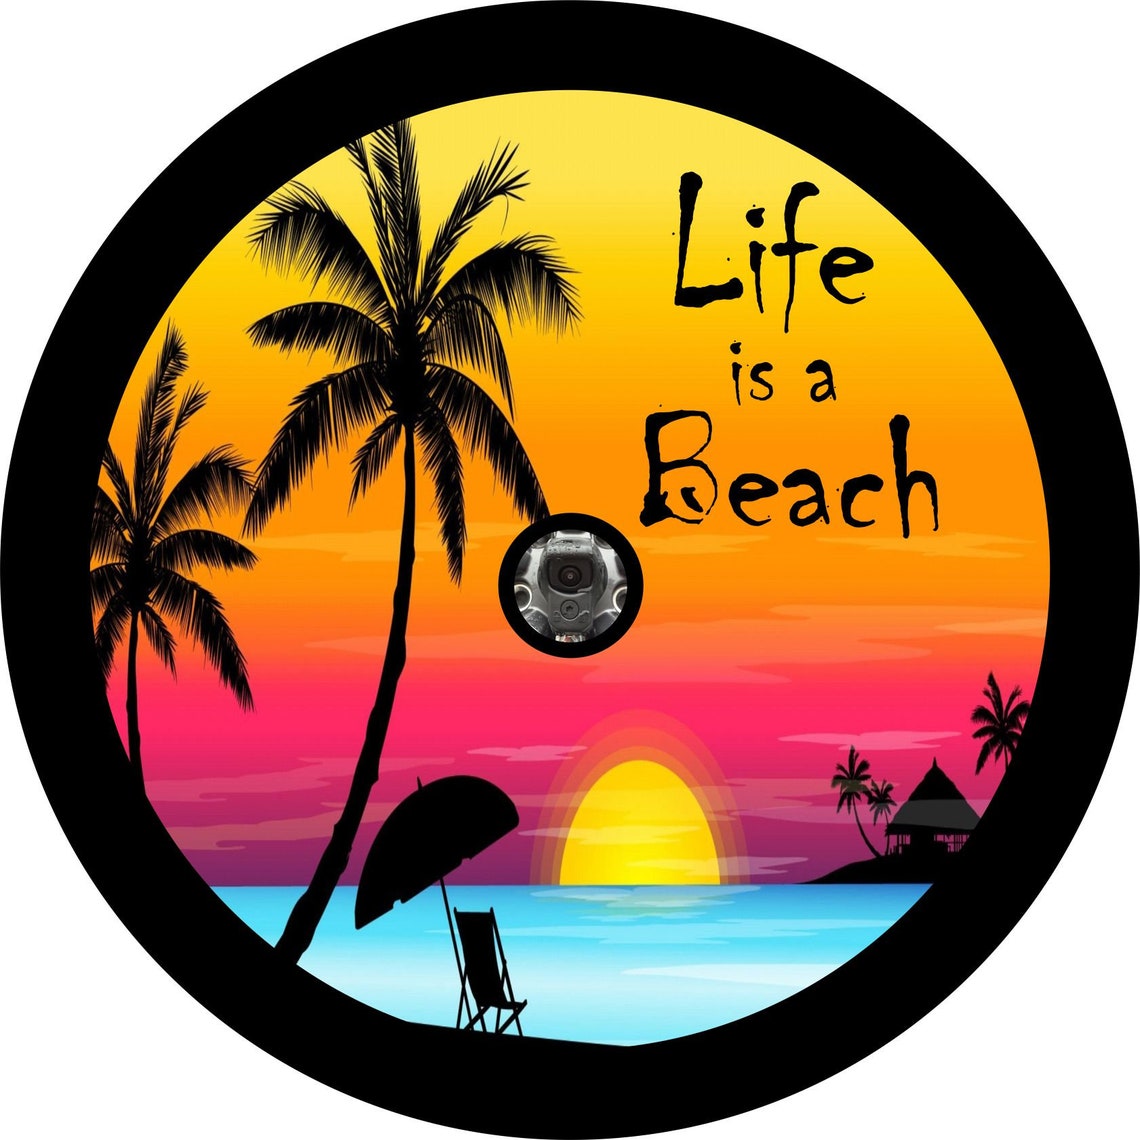 Life is a Beach Sunset Scene Spare Tire Cover for Jeep, Bronco, Campers, RV, & More